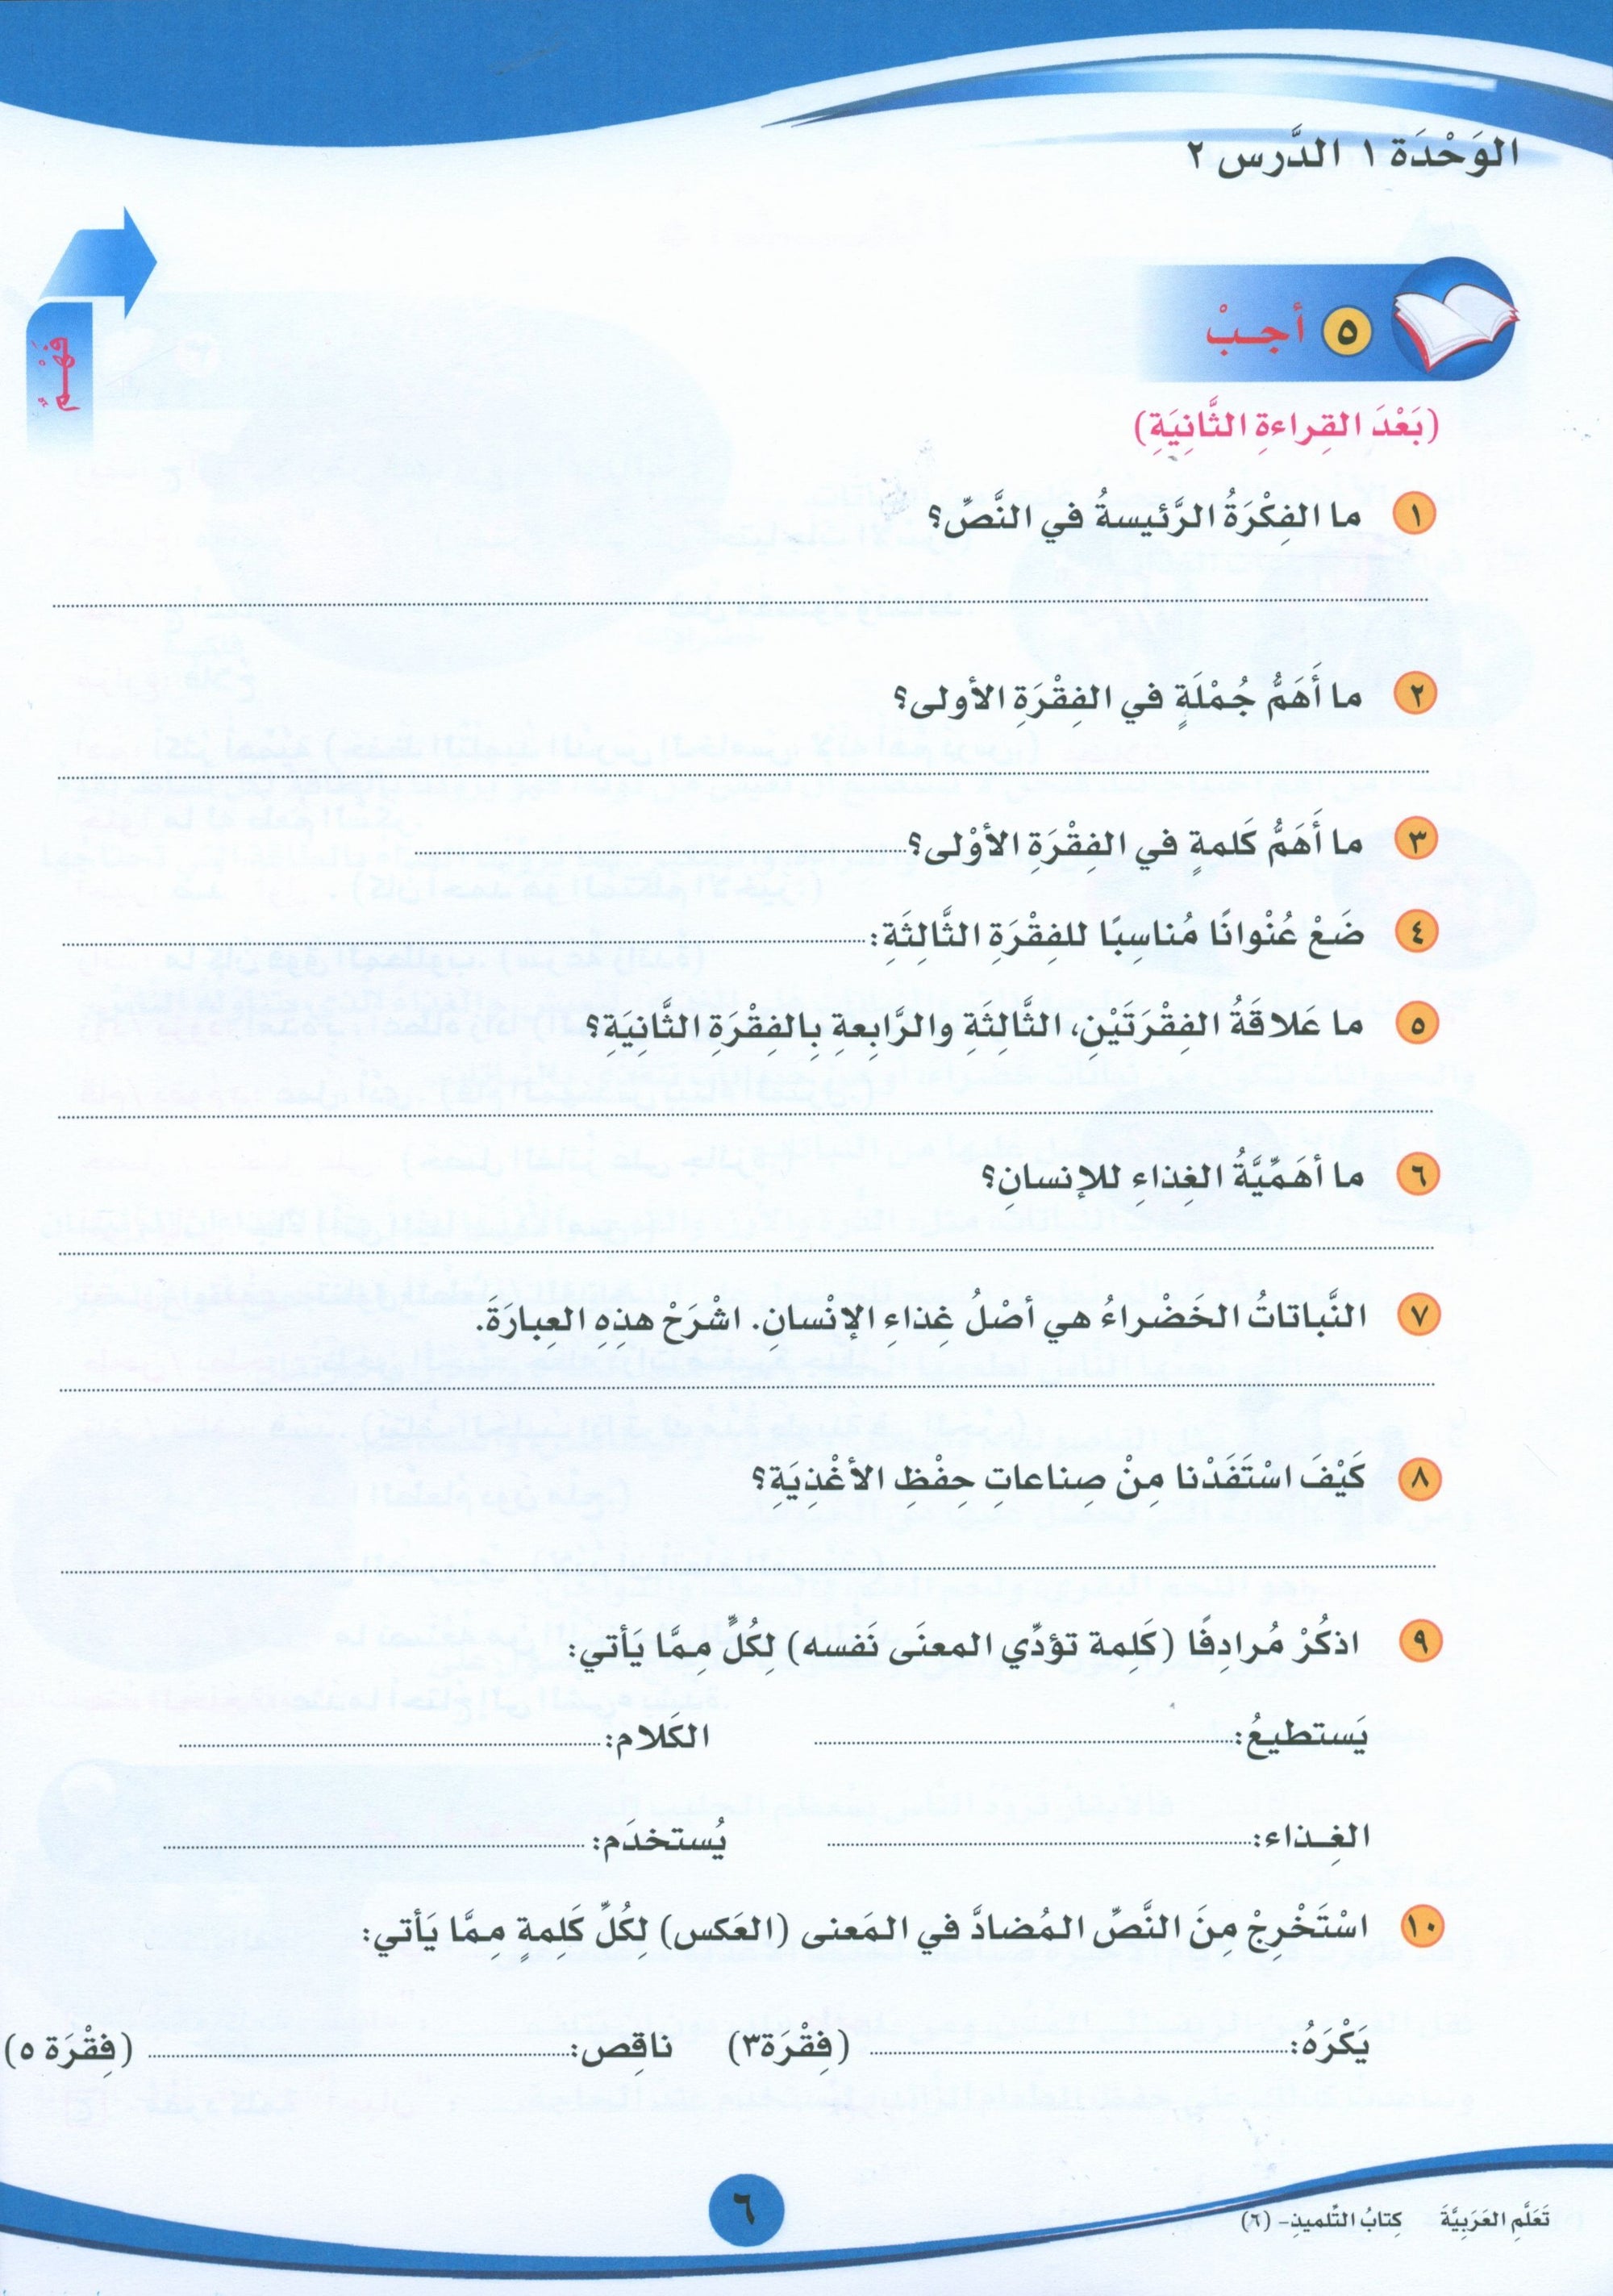 ICO Learn Arabic Textbook: Level 8, Part 1 (with Online Access Code) تعلم العربية